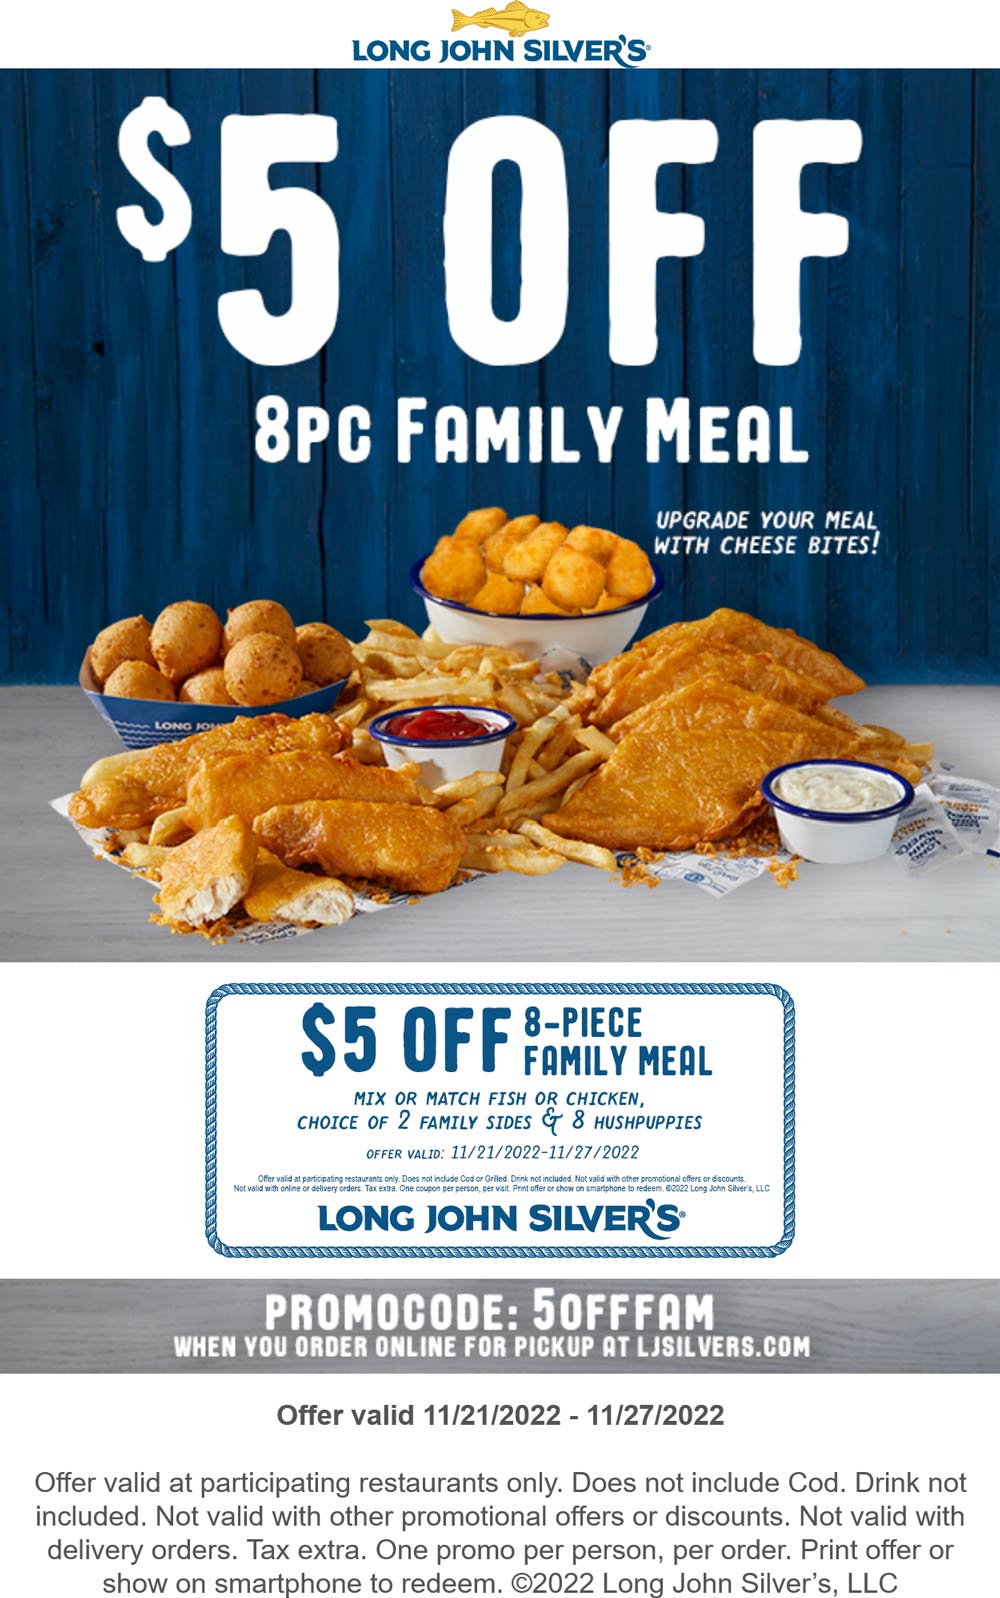 Long John Silvers restaurants Coupon  $5 off 8pc meal at Long John Silvers, or online via promo code 5OFFFAM #longjohnsilvers 